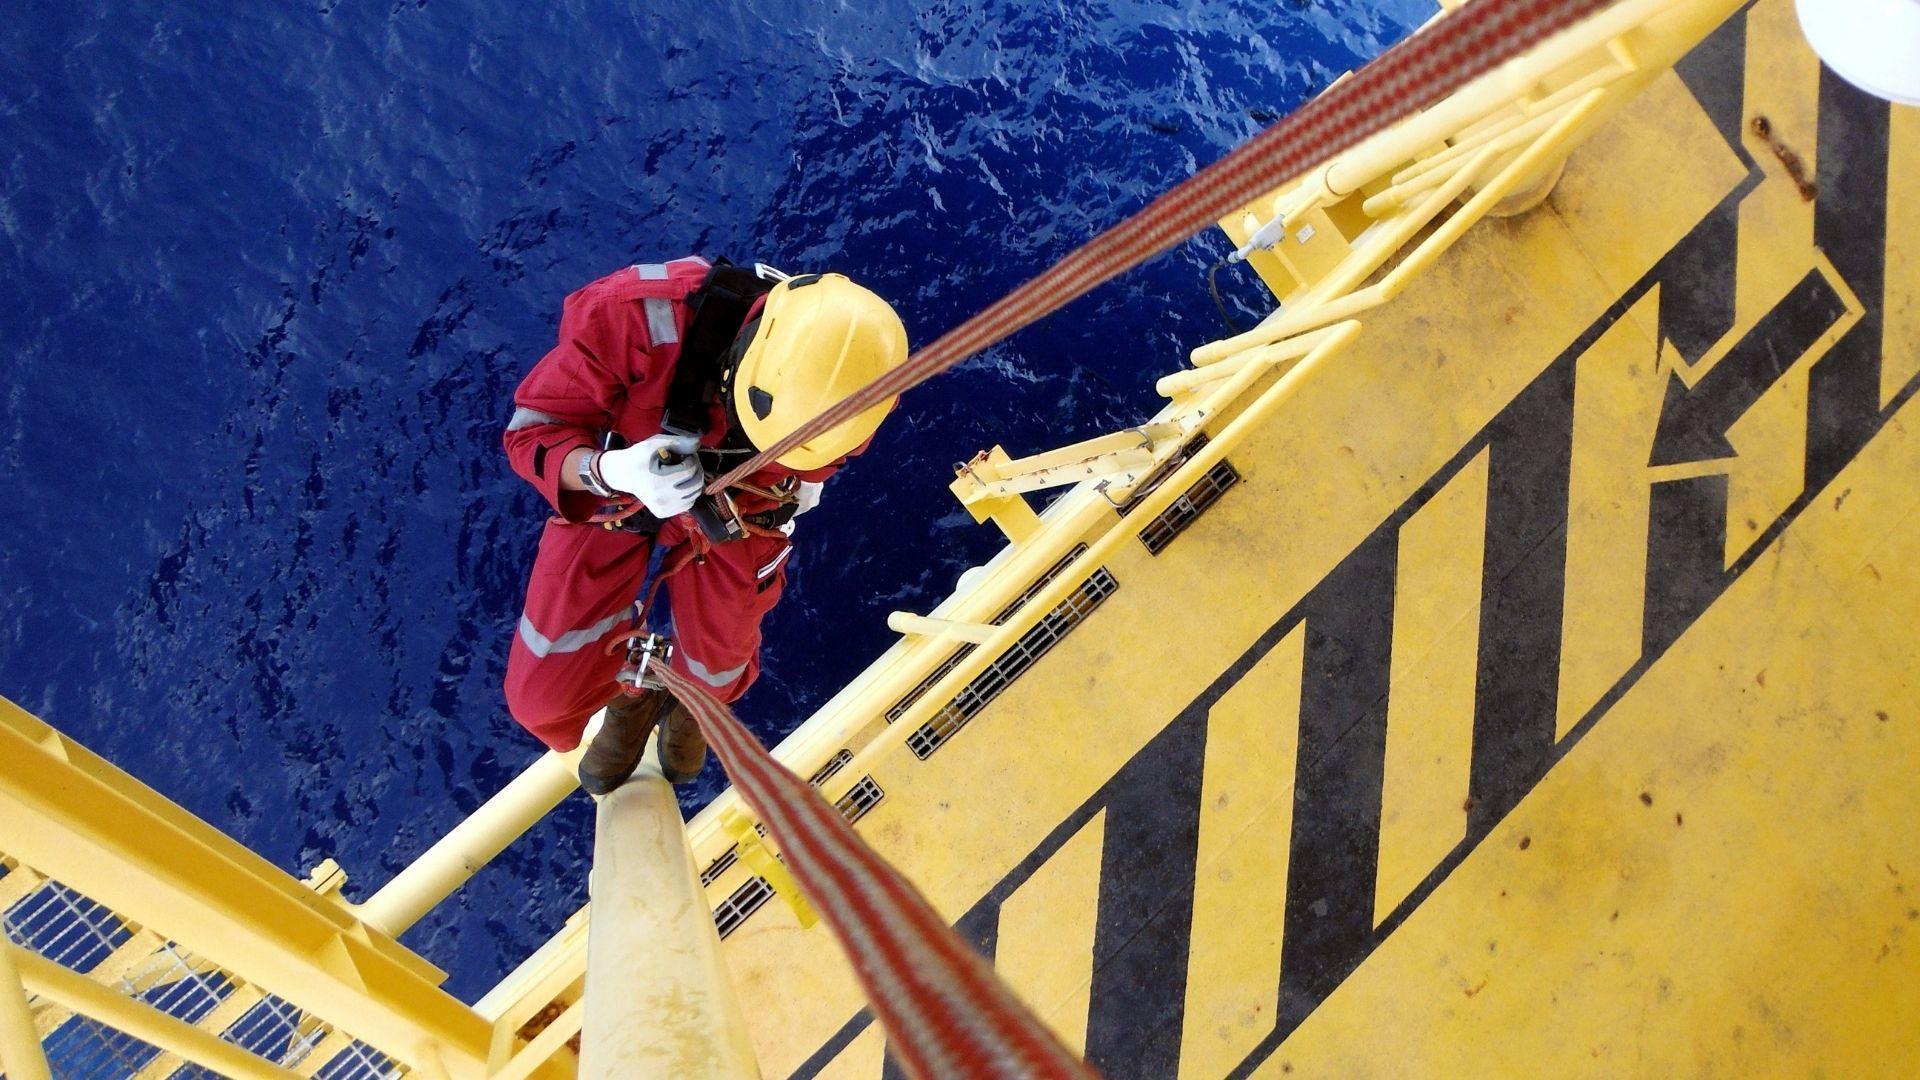 Partner in onshore and offshore rope access, coating and inspection - Future Services Oostende